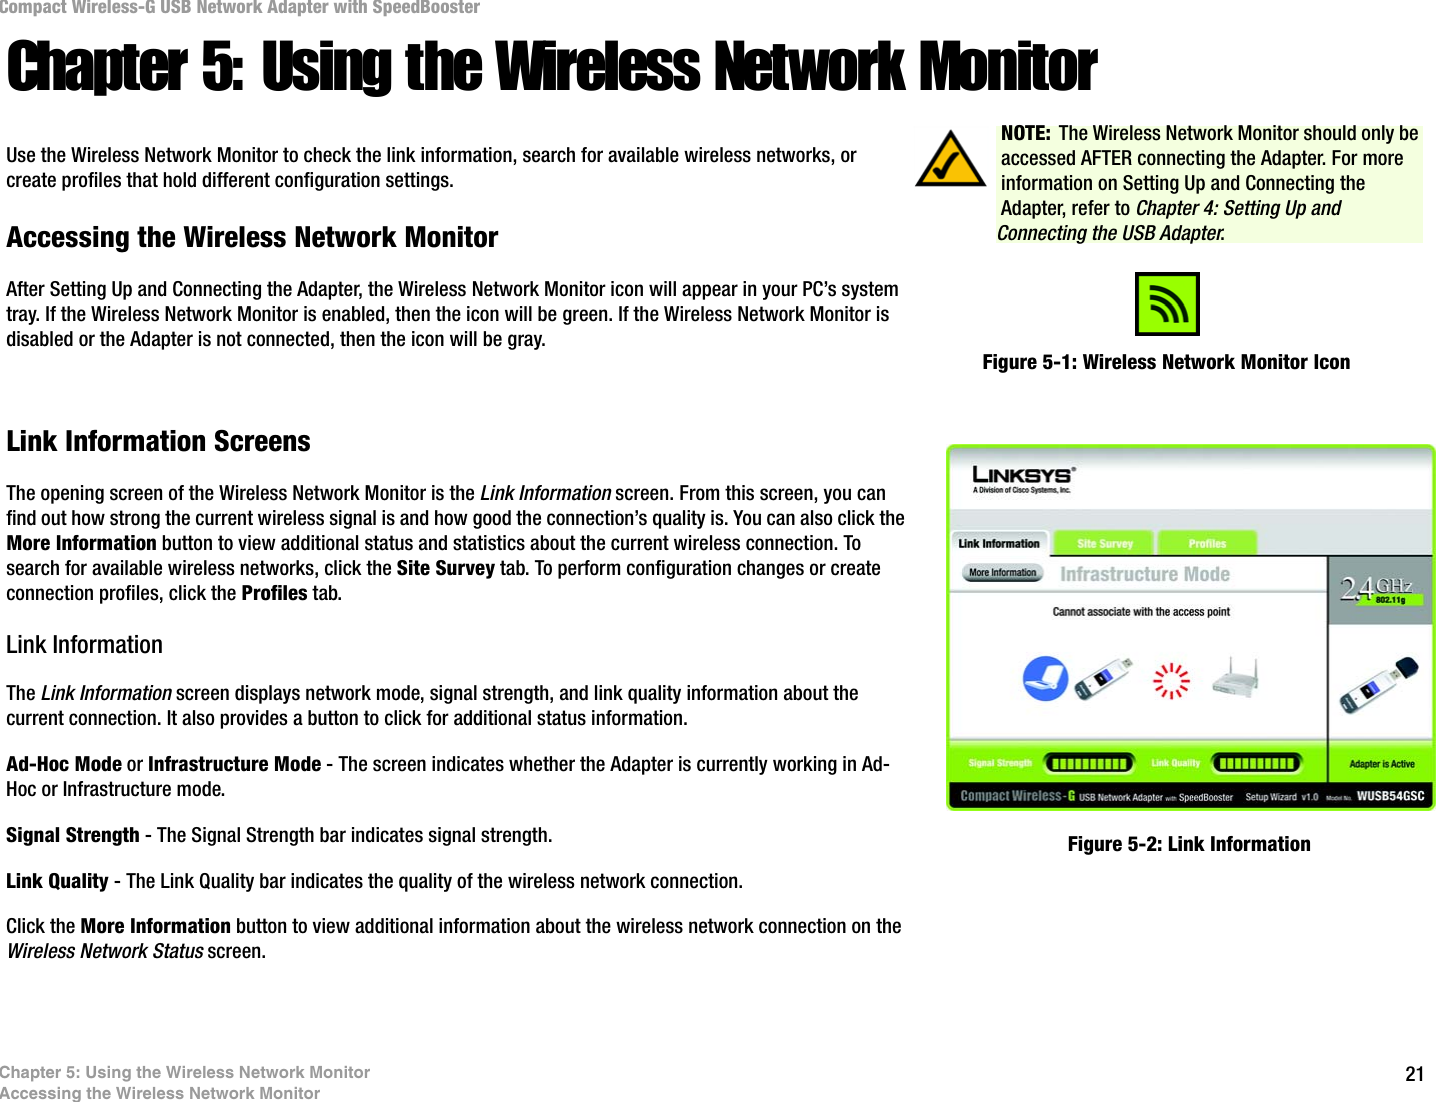 21Chapter 5: Using the Wireless Network MonitorAccessing the Wireless Network MonitorCompact Wireless-G USB Network Adapter with SpeedBoosterChapter 5: Using the Wireless Network MonitorUse the Wireless Network Monitor to check the link information, search for available wireless networks, or create profiles that hold different configuration settings.Accessing the Wireless Network MonitorAfter Setting Up and Connecting the Adapter, the Wireless Network Monitor icon will appear in your PC’s system tray. If the Wireless Network Monitor is enabled, then the icon will be green. If the Wireless Network Monitor is disabled or the Adapter is not connected, then the icon will be gray.Link Information ScreensThe opening screen of the Wireless Network Monitor is the Link Information screen. From this screen, you can find out how strong the current wireless signal is and how good the connection’s quality is. You can also click the More Information button to view additional status and statistics about the current wireless connection. To search for available wireless networks, click the Site Survey tab. To perform configuration changes or create connection profiles, click the Profiles tab.Link InformationThe Link Information screen displays network mode, signal strength, and link quality information about the current connection. It also provides a button to click for additional status information.Ad-Hoc Mode or Infrastructure Mode - The screen indicates whether the Adapter is currently working in Ad-Hoc or Infrastructure mode.Signal Strength - The Signal Strength bar indicates signal strength. Link Quality - The Link Quality bar indicates the quality of the wireless network connection.Click the More Information button to view additional information about the wireless network connection on the Wireless Network Status screen.Figure 5-1: Wireless Network Monitor IconFigure 5-2: Link InformationNOTE: The Wireless Network Monitor should only be accessed AFTER connecting the Adapter. For more information on Setting Up and Connecting the Adapter, refer to Chapter 4: Setting Up and Connecting the USB Adapter.